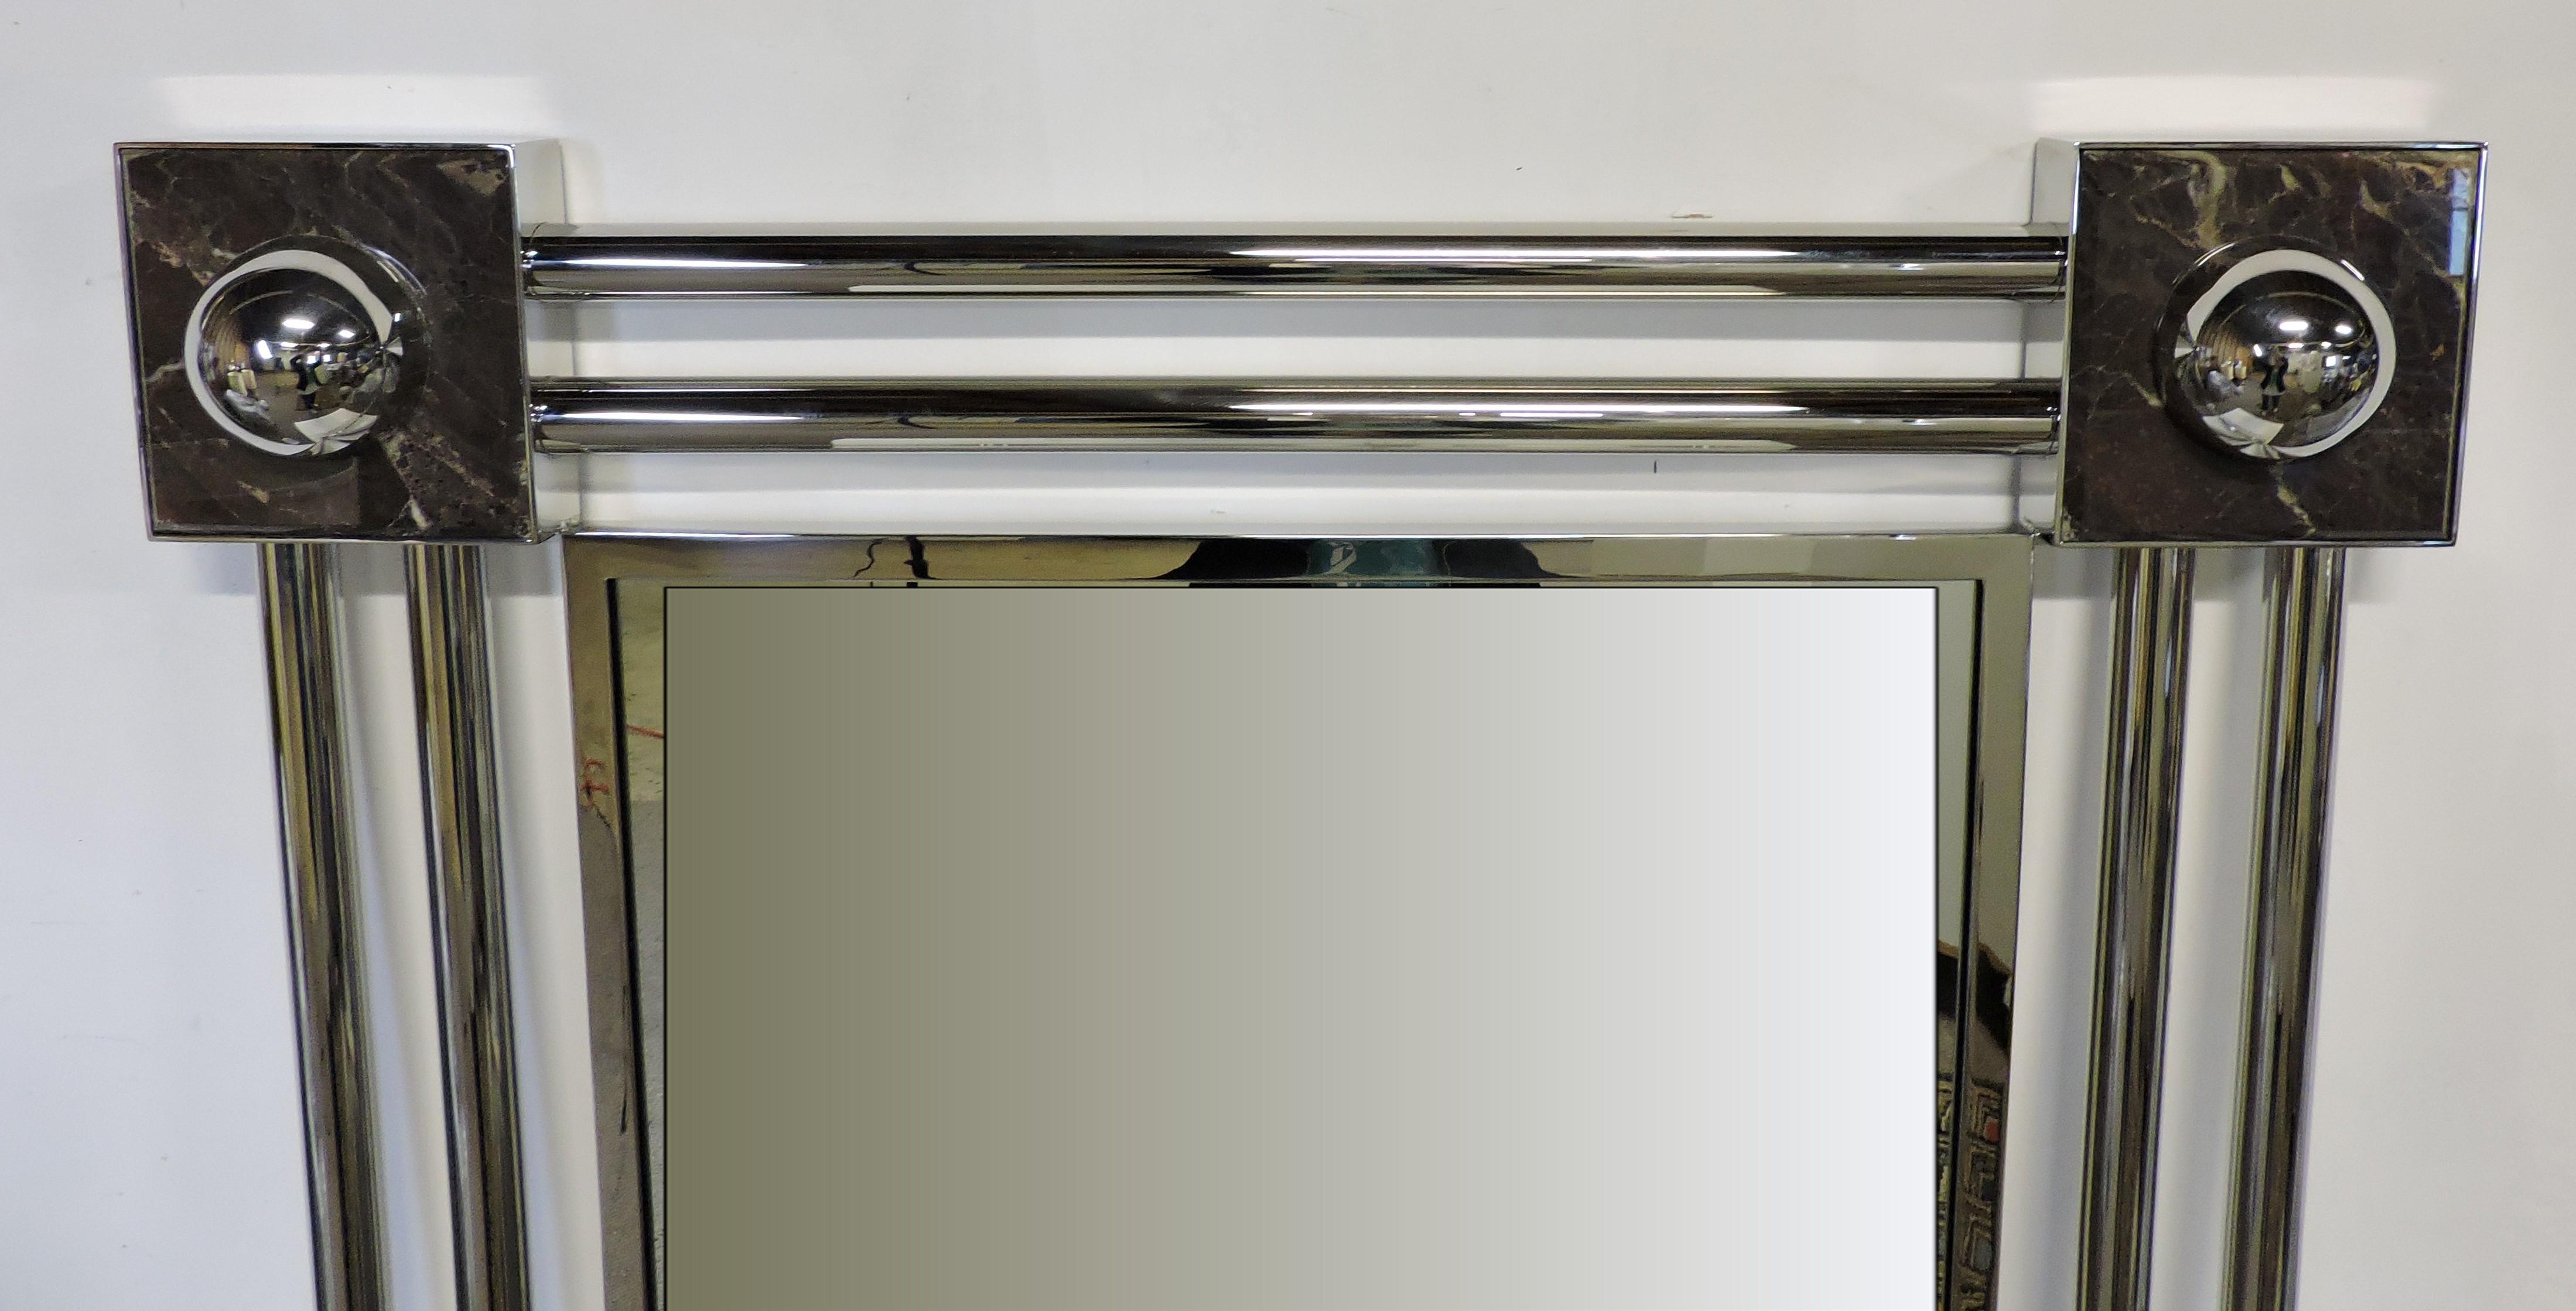 Striking looking and beautifully constructed Reflection Two Mirror designed by J. Wade Beam and made by high end furniture manufactuer, Brueton. This large mirror has a frame of polished stainless steel tubing with marble accents in the four